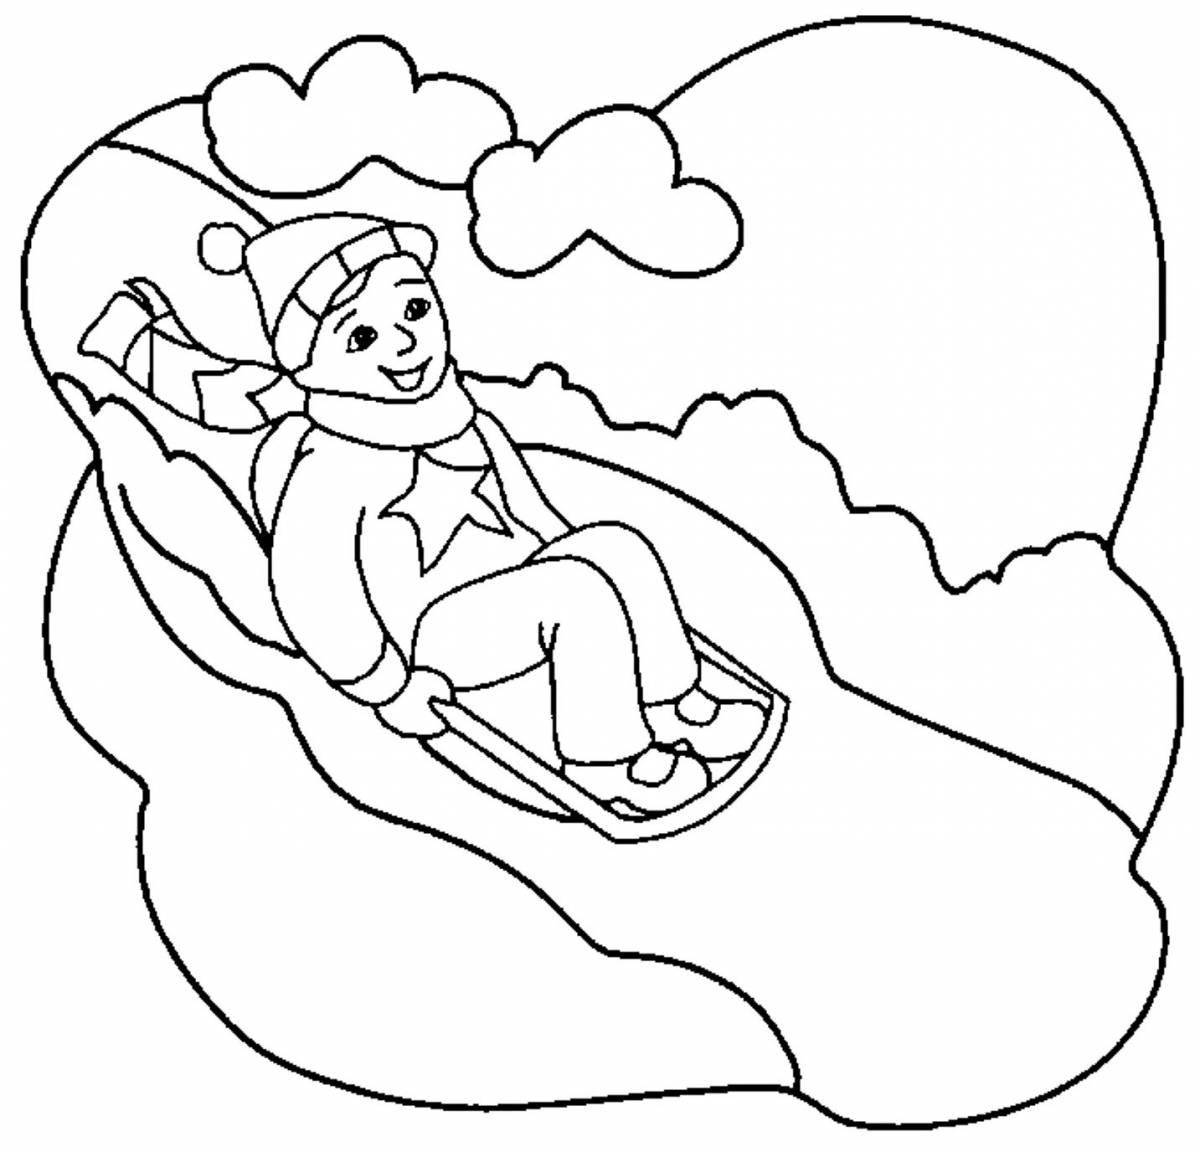 Playful snow slide coloring page